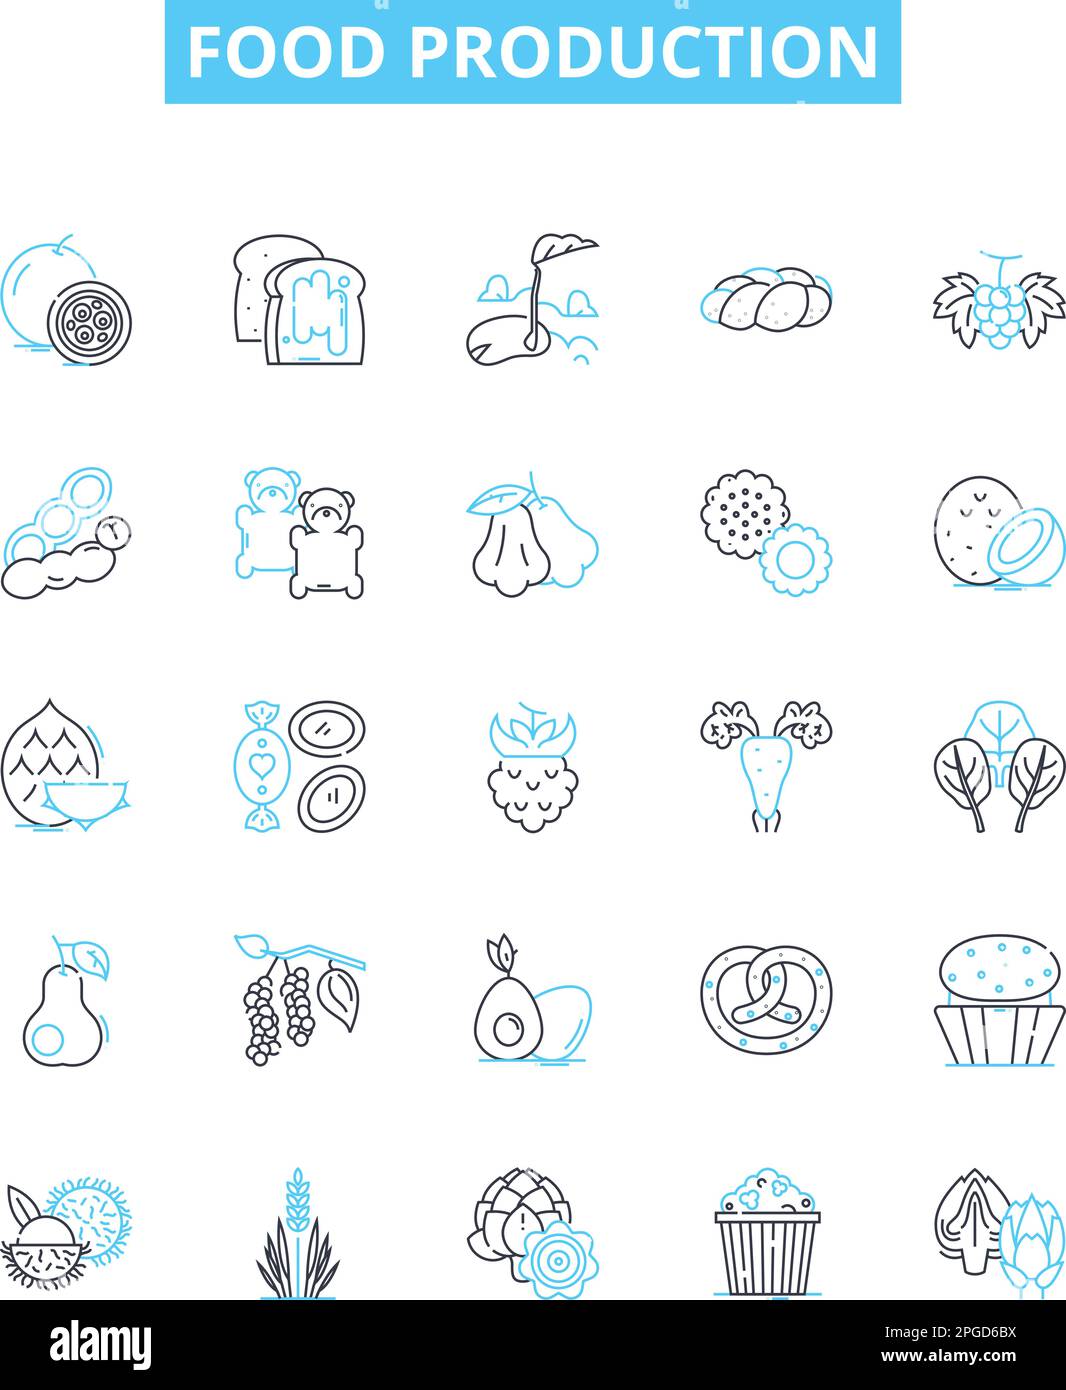 Food production vector line icons set. Farming, Agriculture, Processed, Production, Packaging, Quality, Culinary illustration outline concept symbols Stock Vector